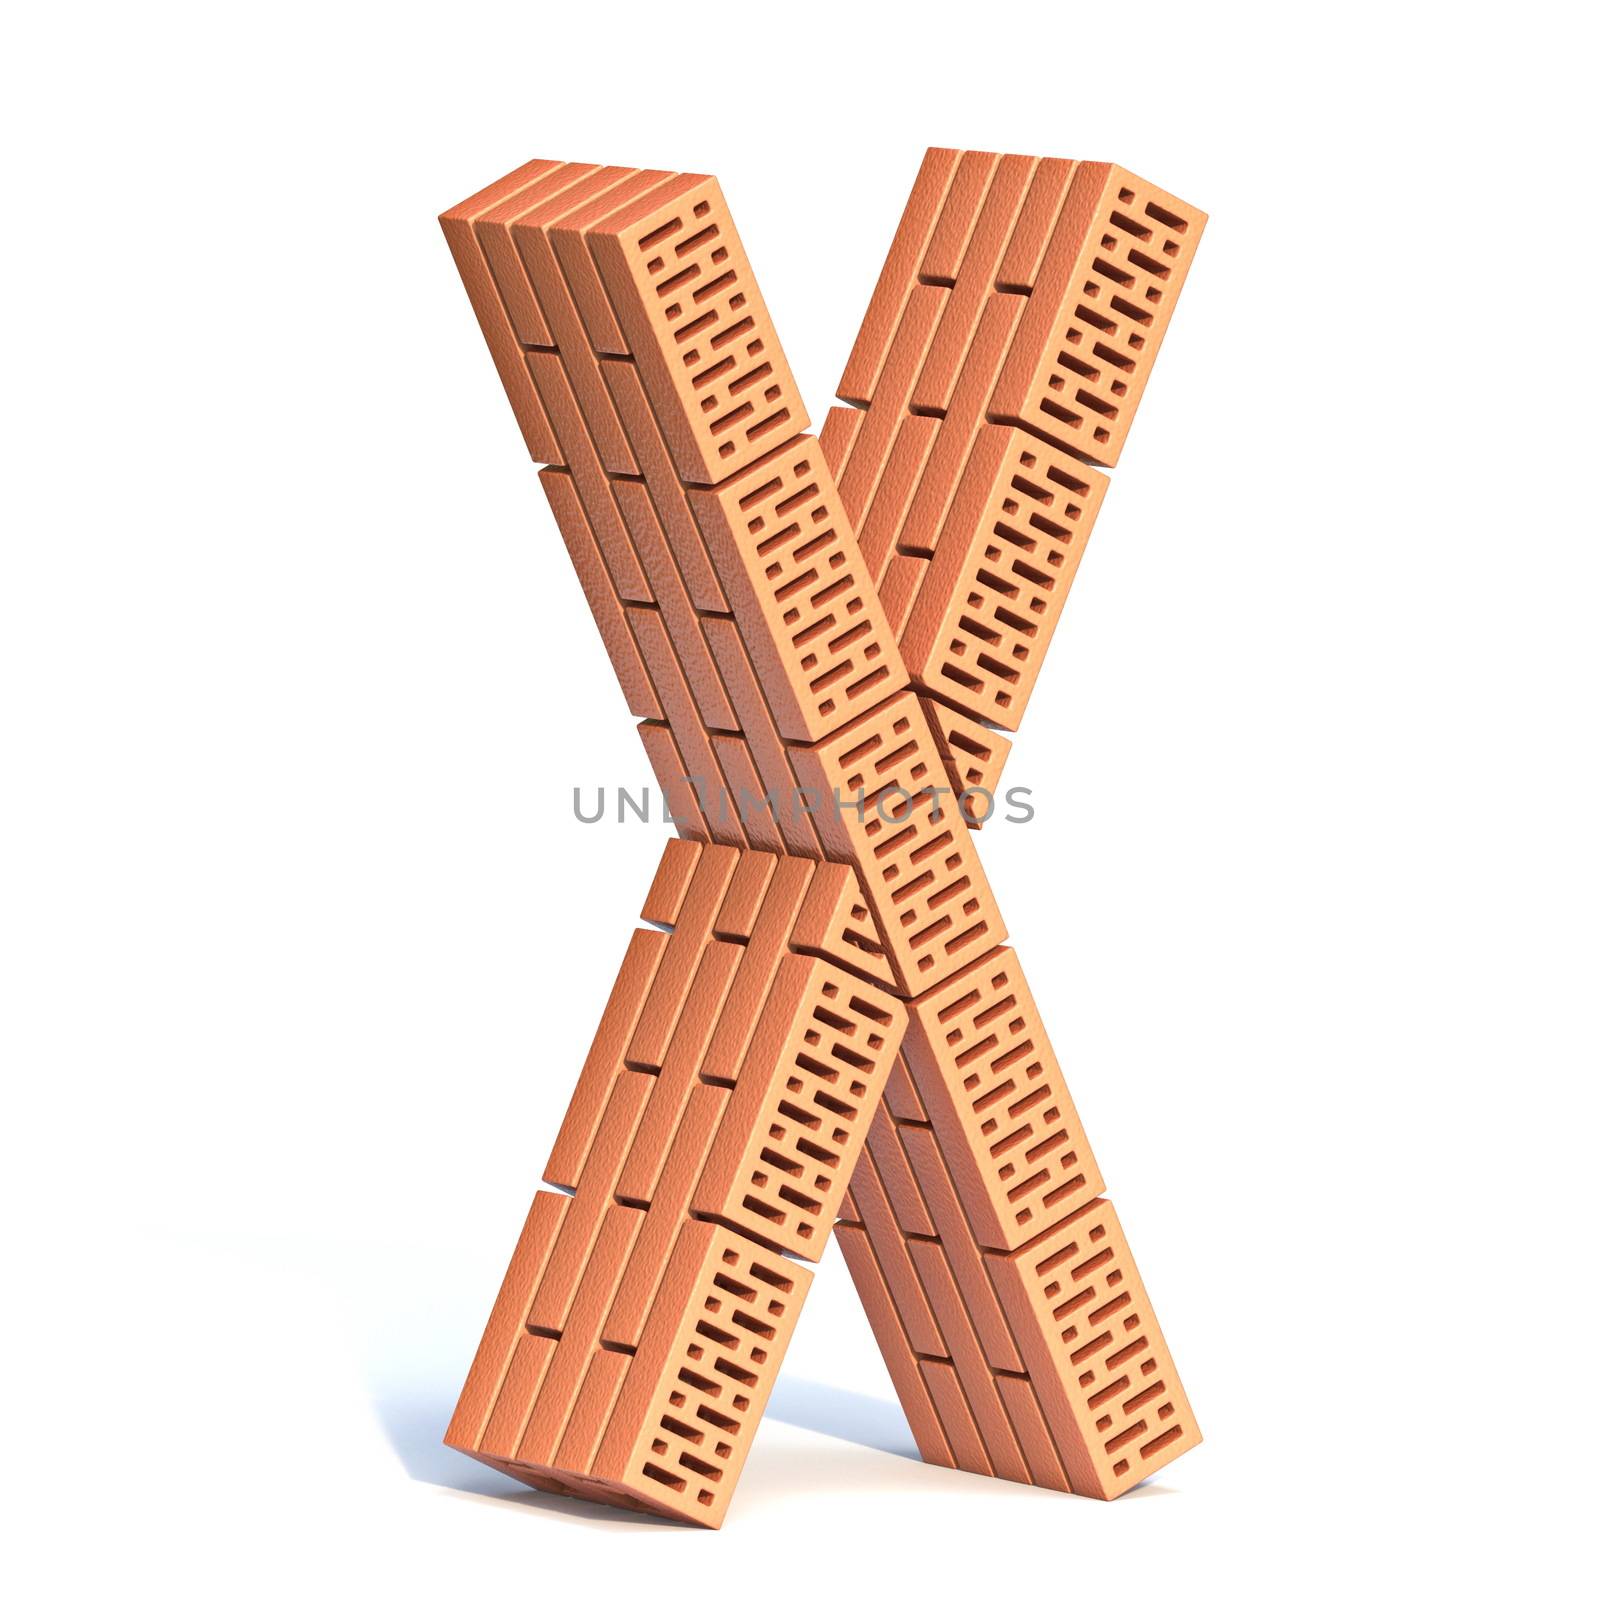 Brick wall font Letter X 3D render illustration isolated on white background